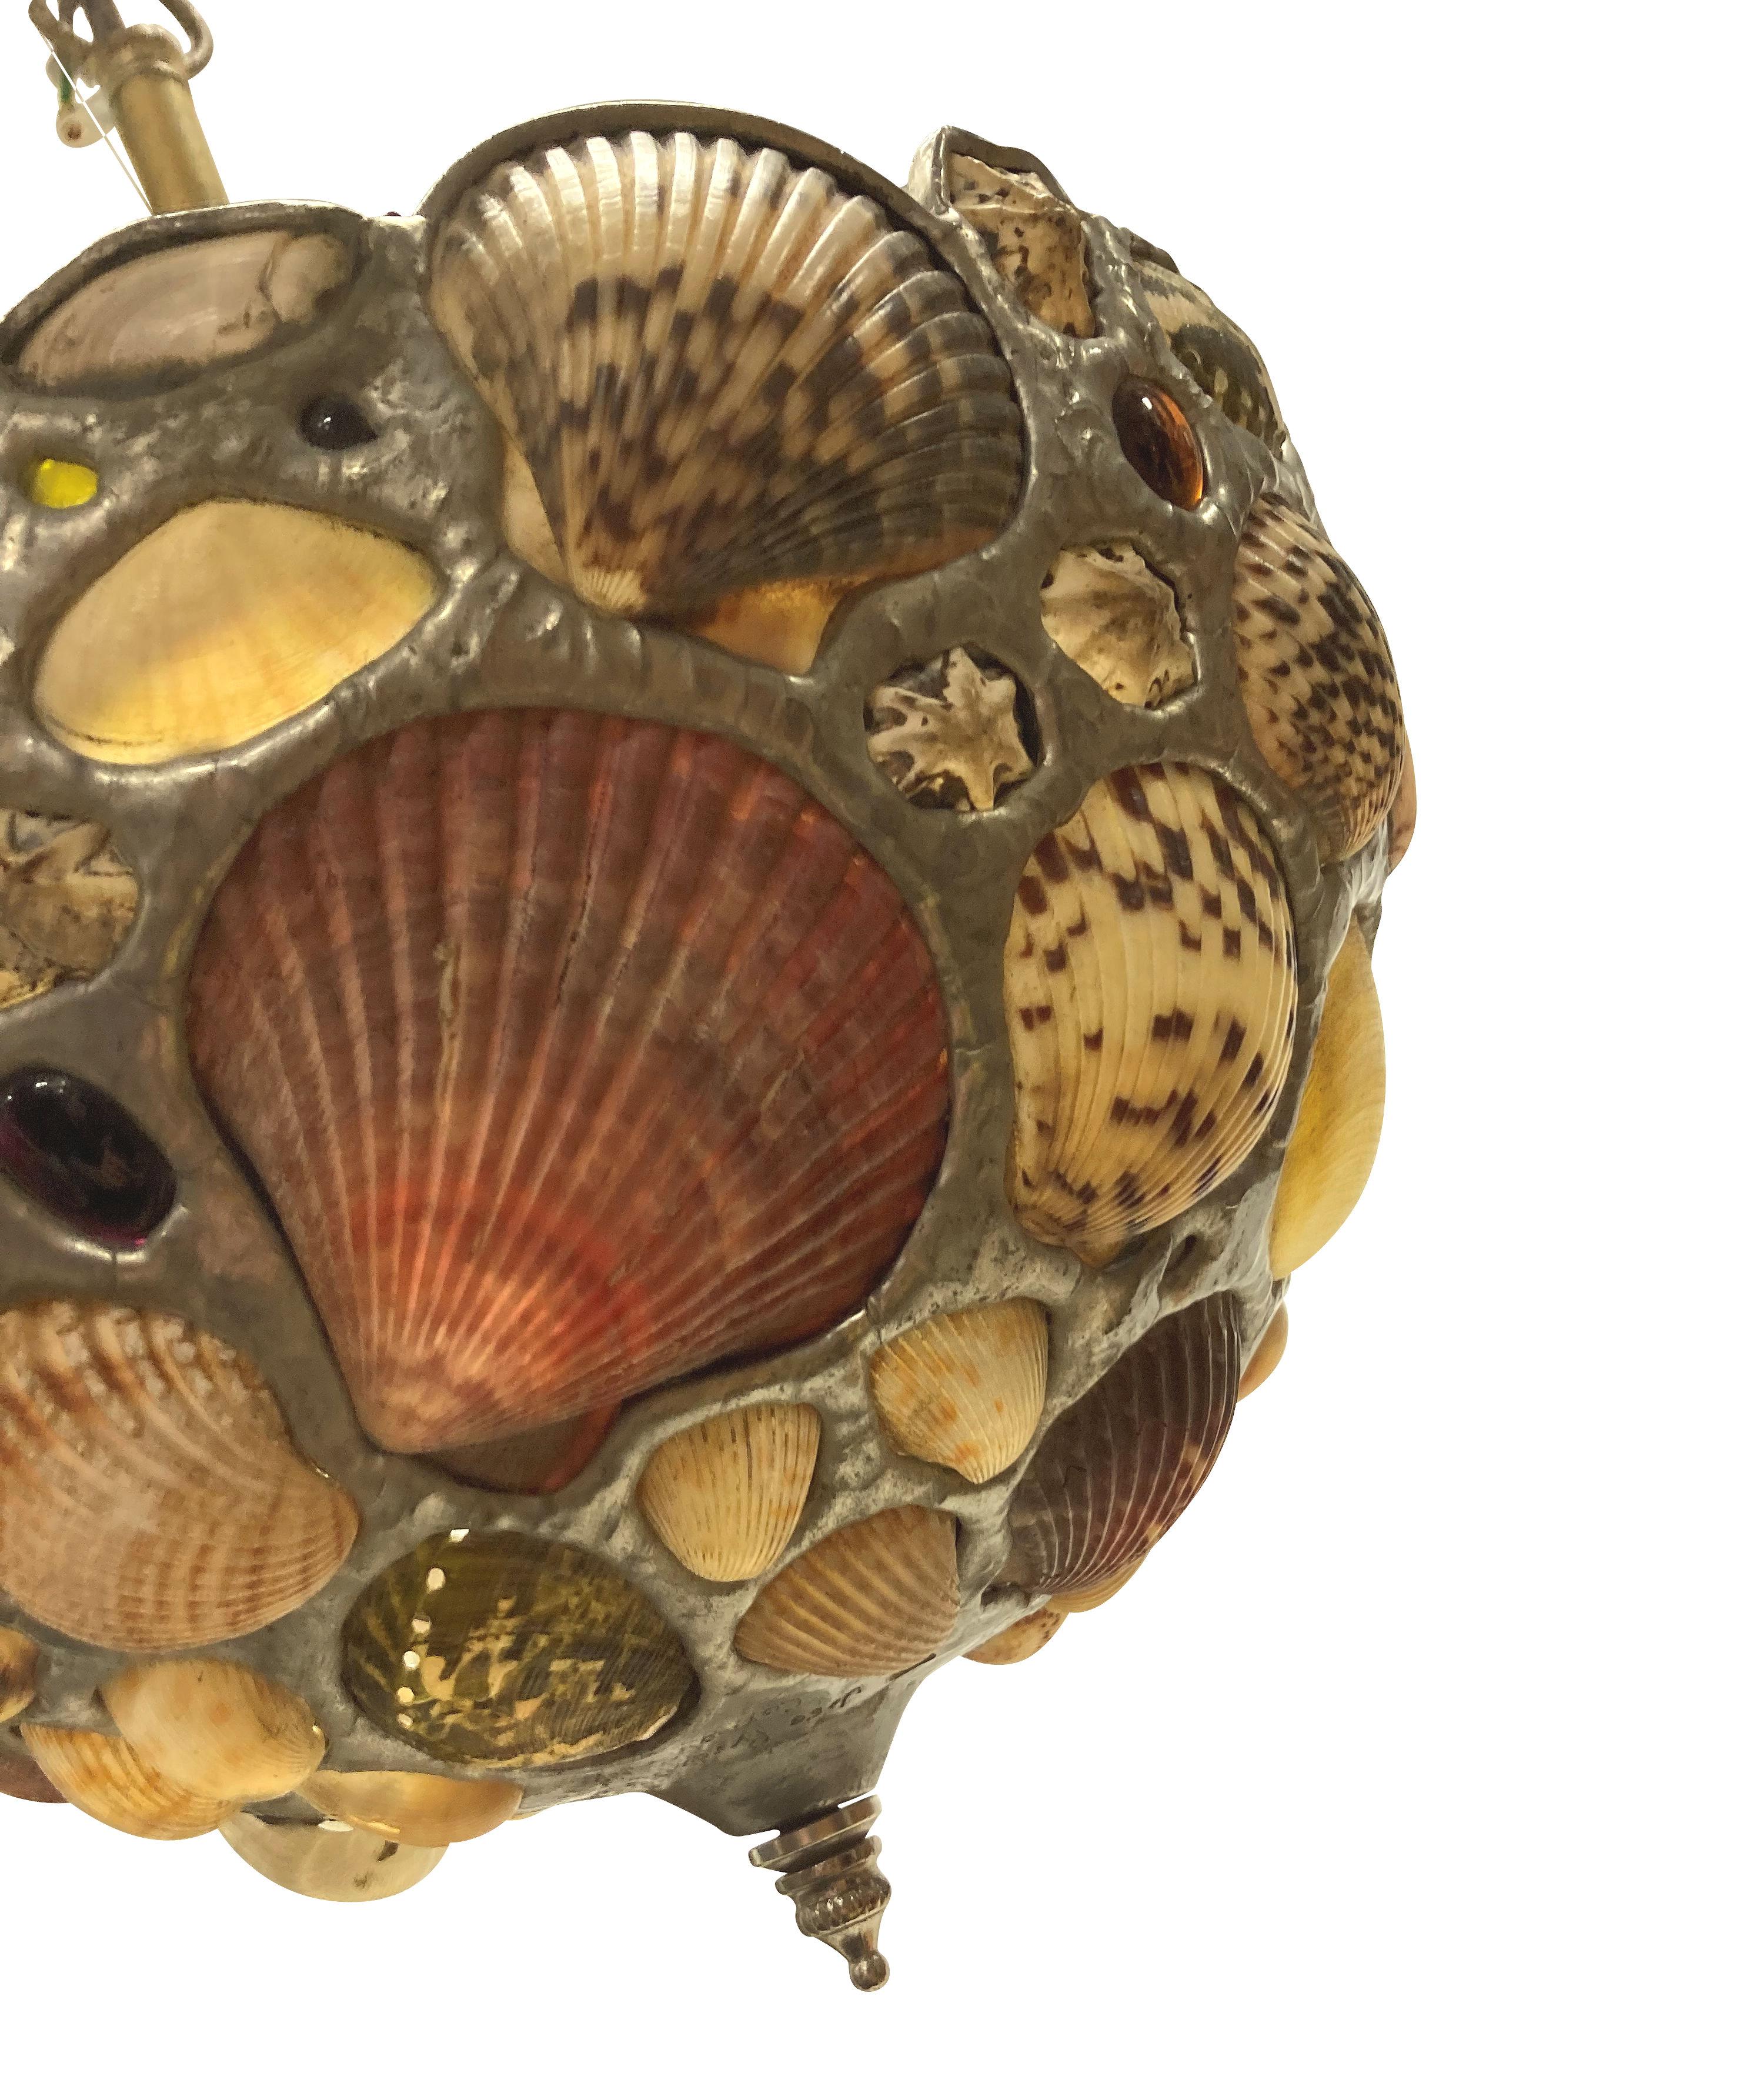 An American shell grotto pendant light, set with various sea shells and coloured beach glass. By Jose Produit studios.